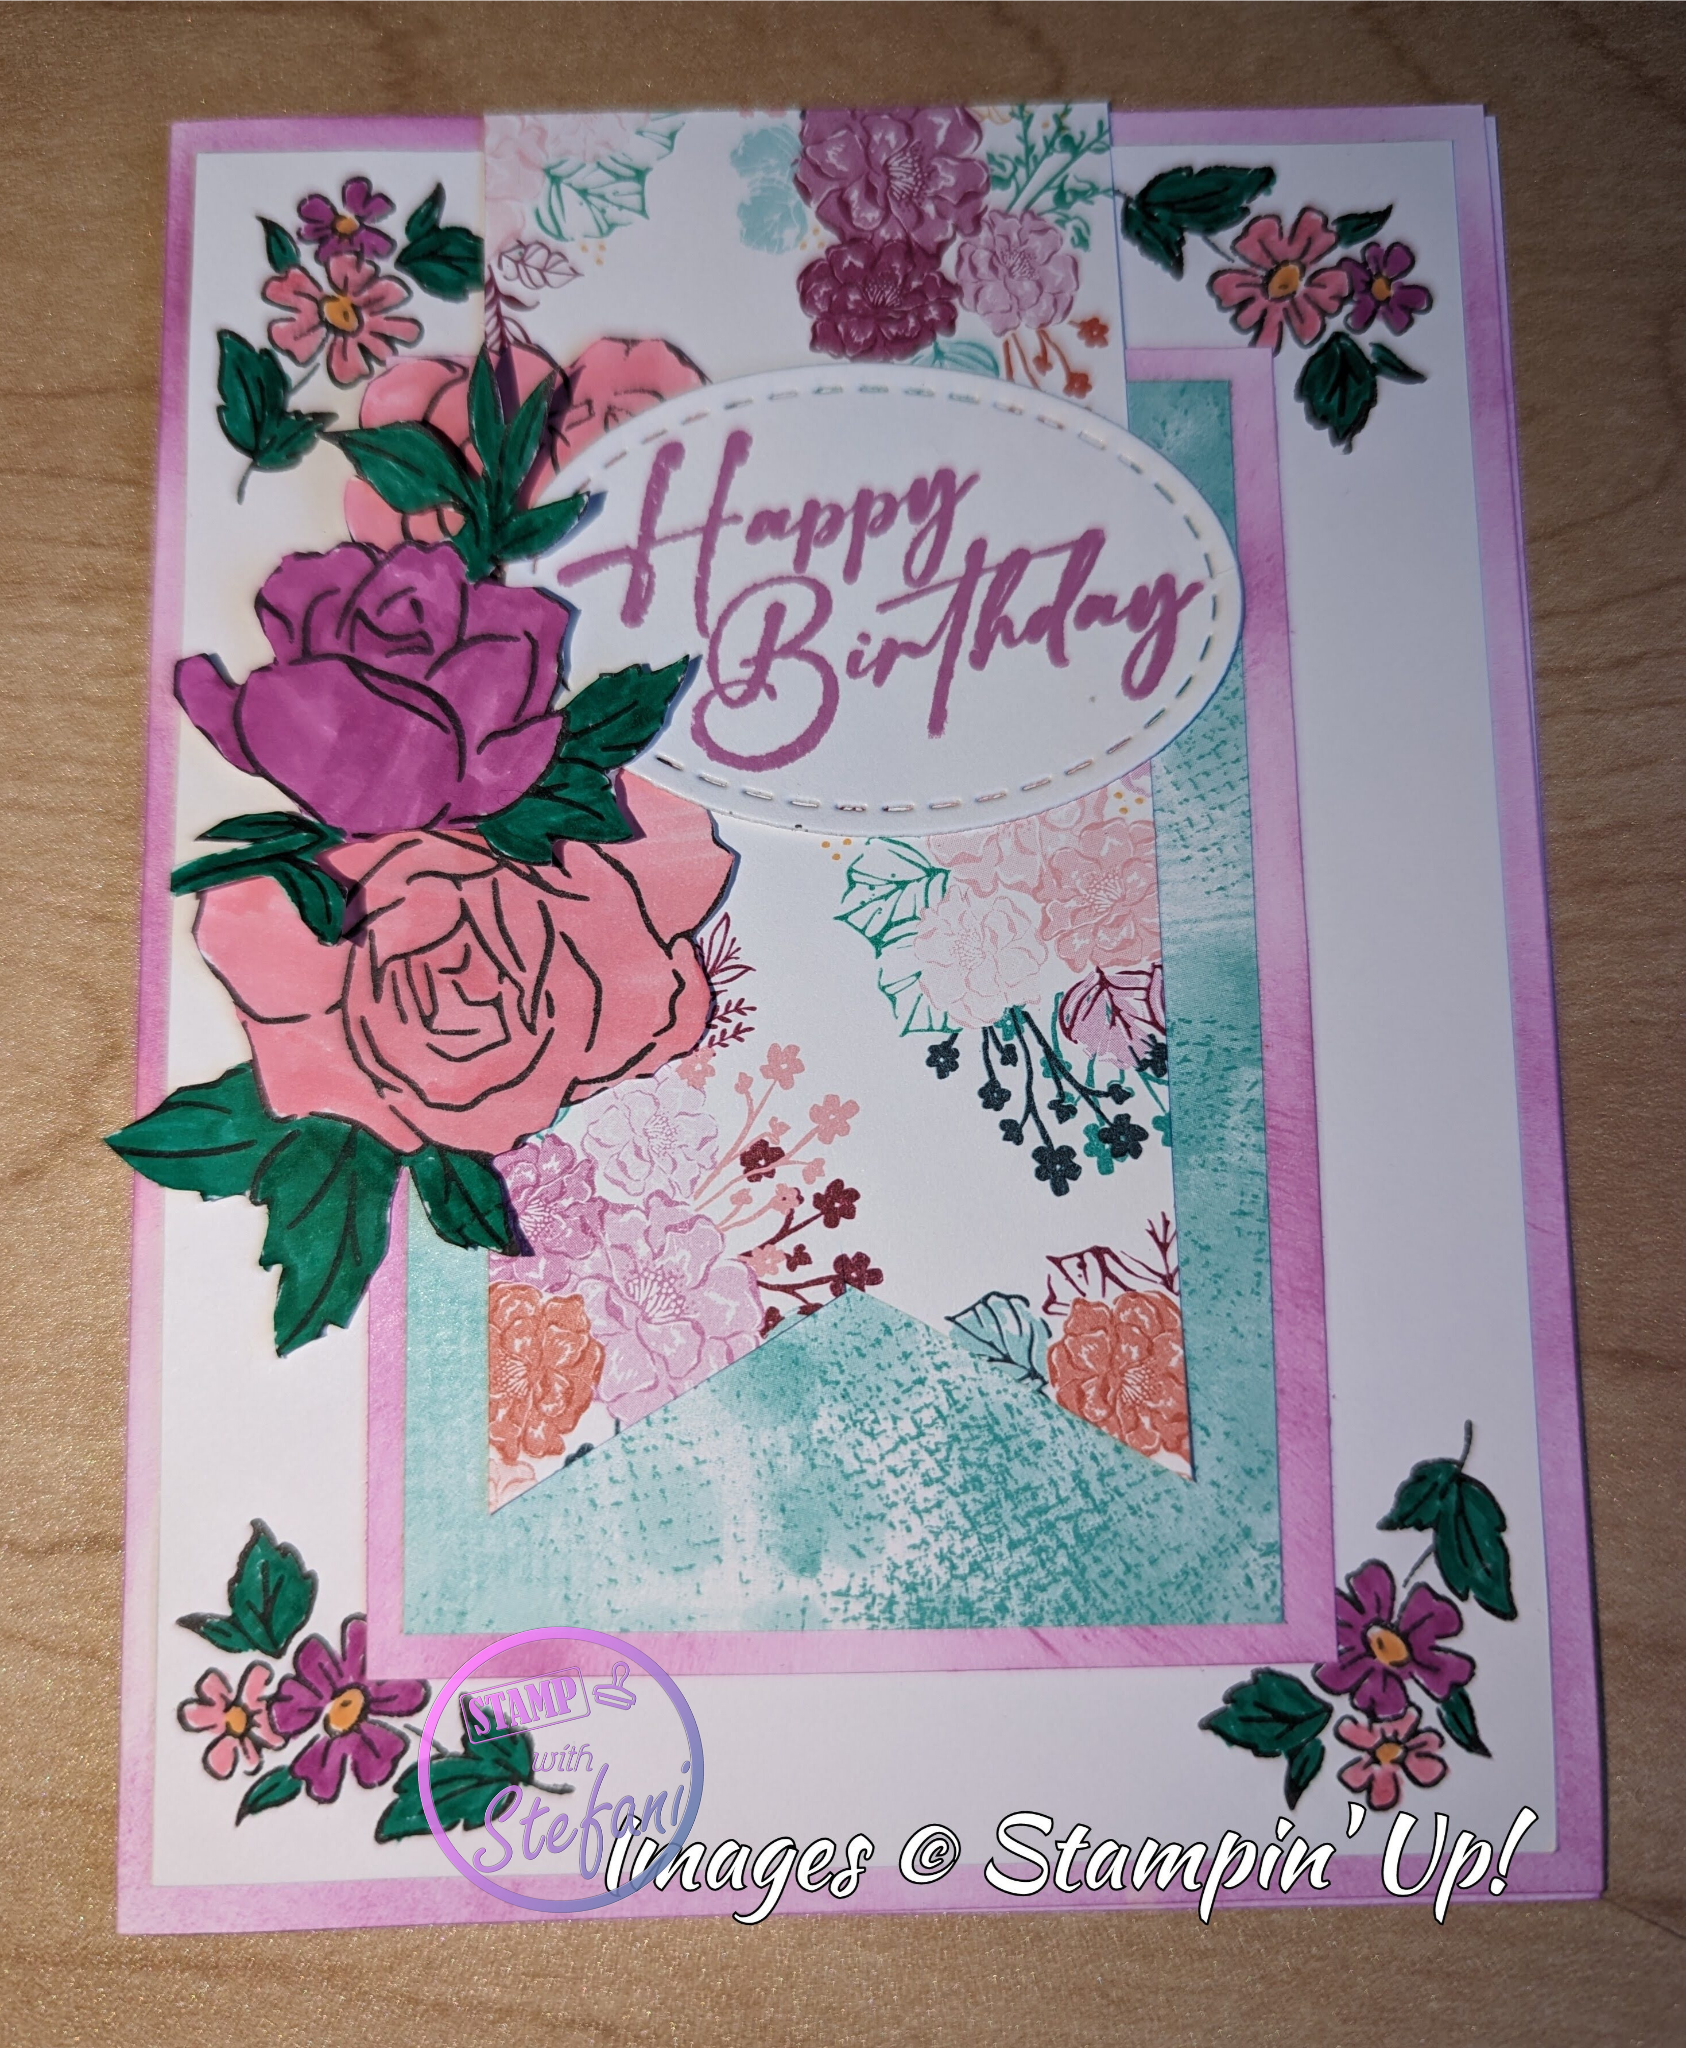 Birthday Card featuring Stampin' Up Unbounded Beauty and handmade by Stefani of Stamp With Stefani